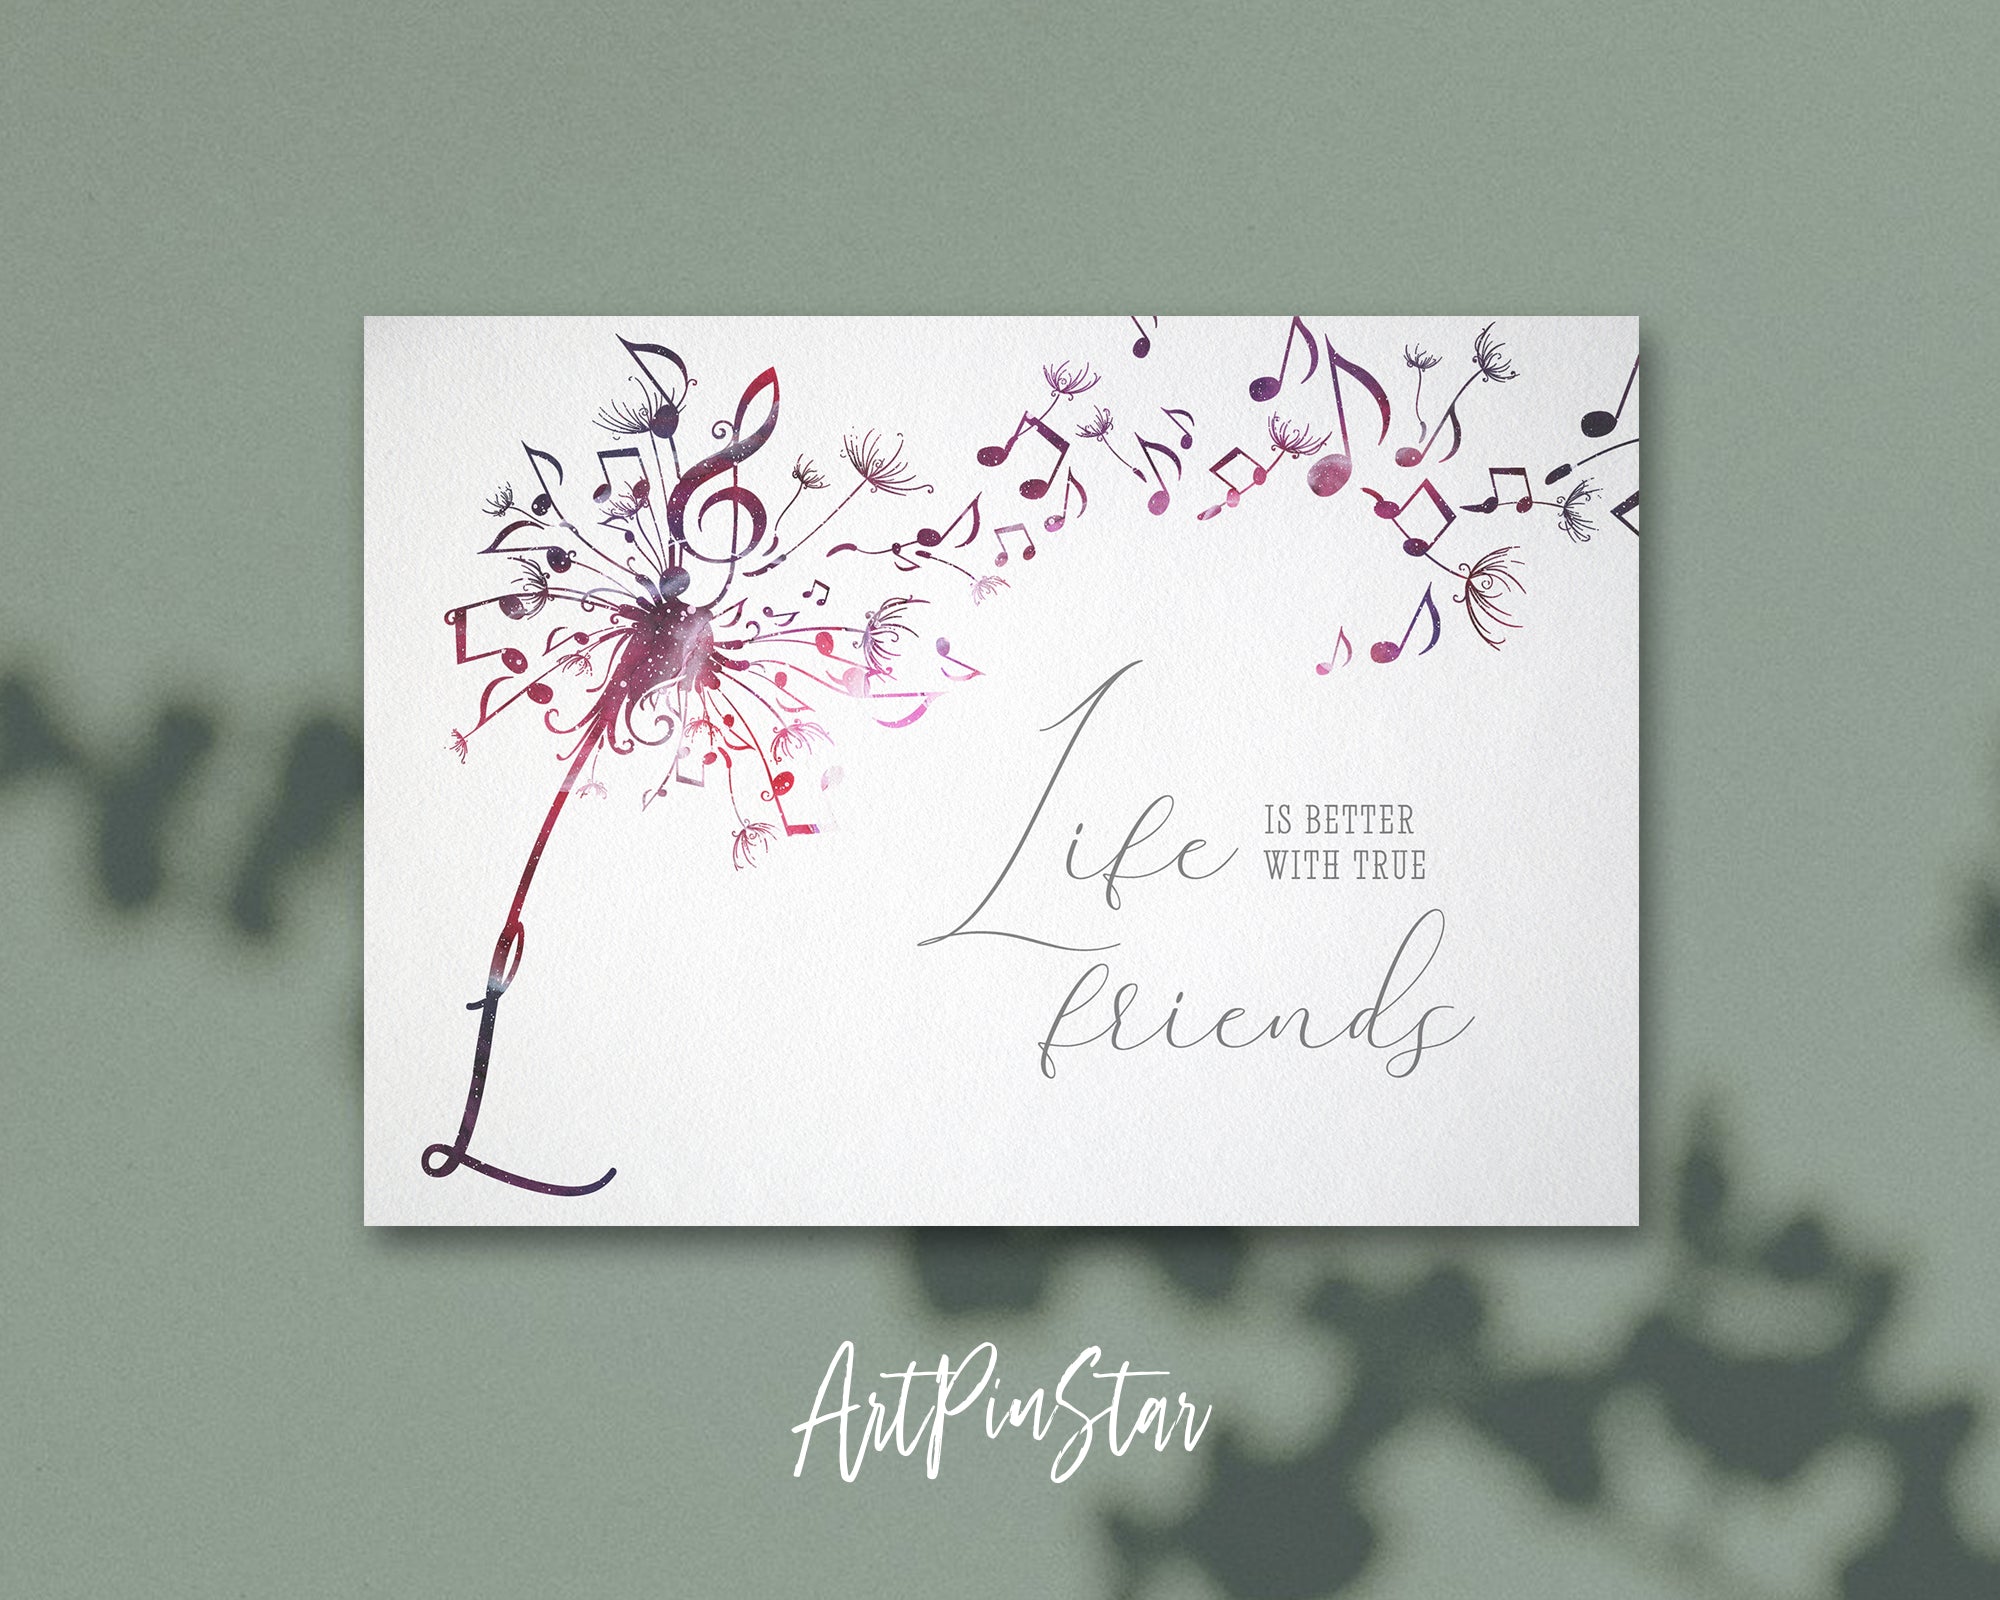 Inspiring Music Quote Letter L Symbol Life is better with true friends